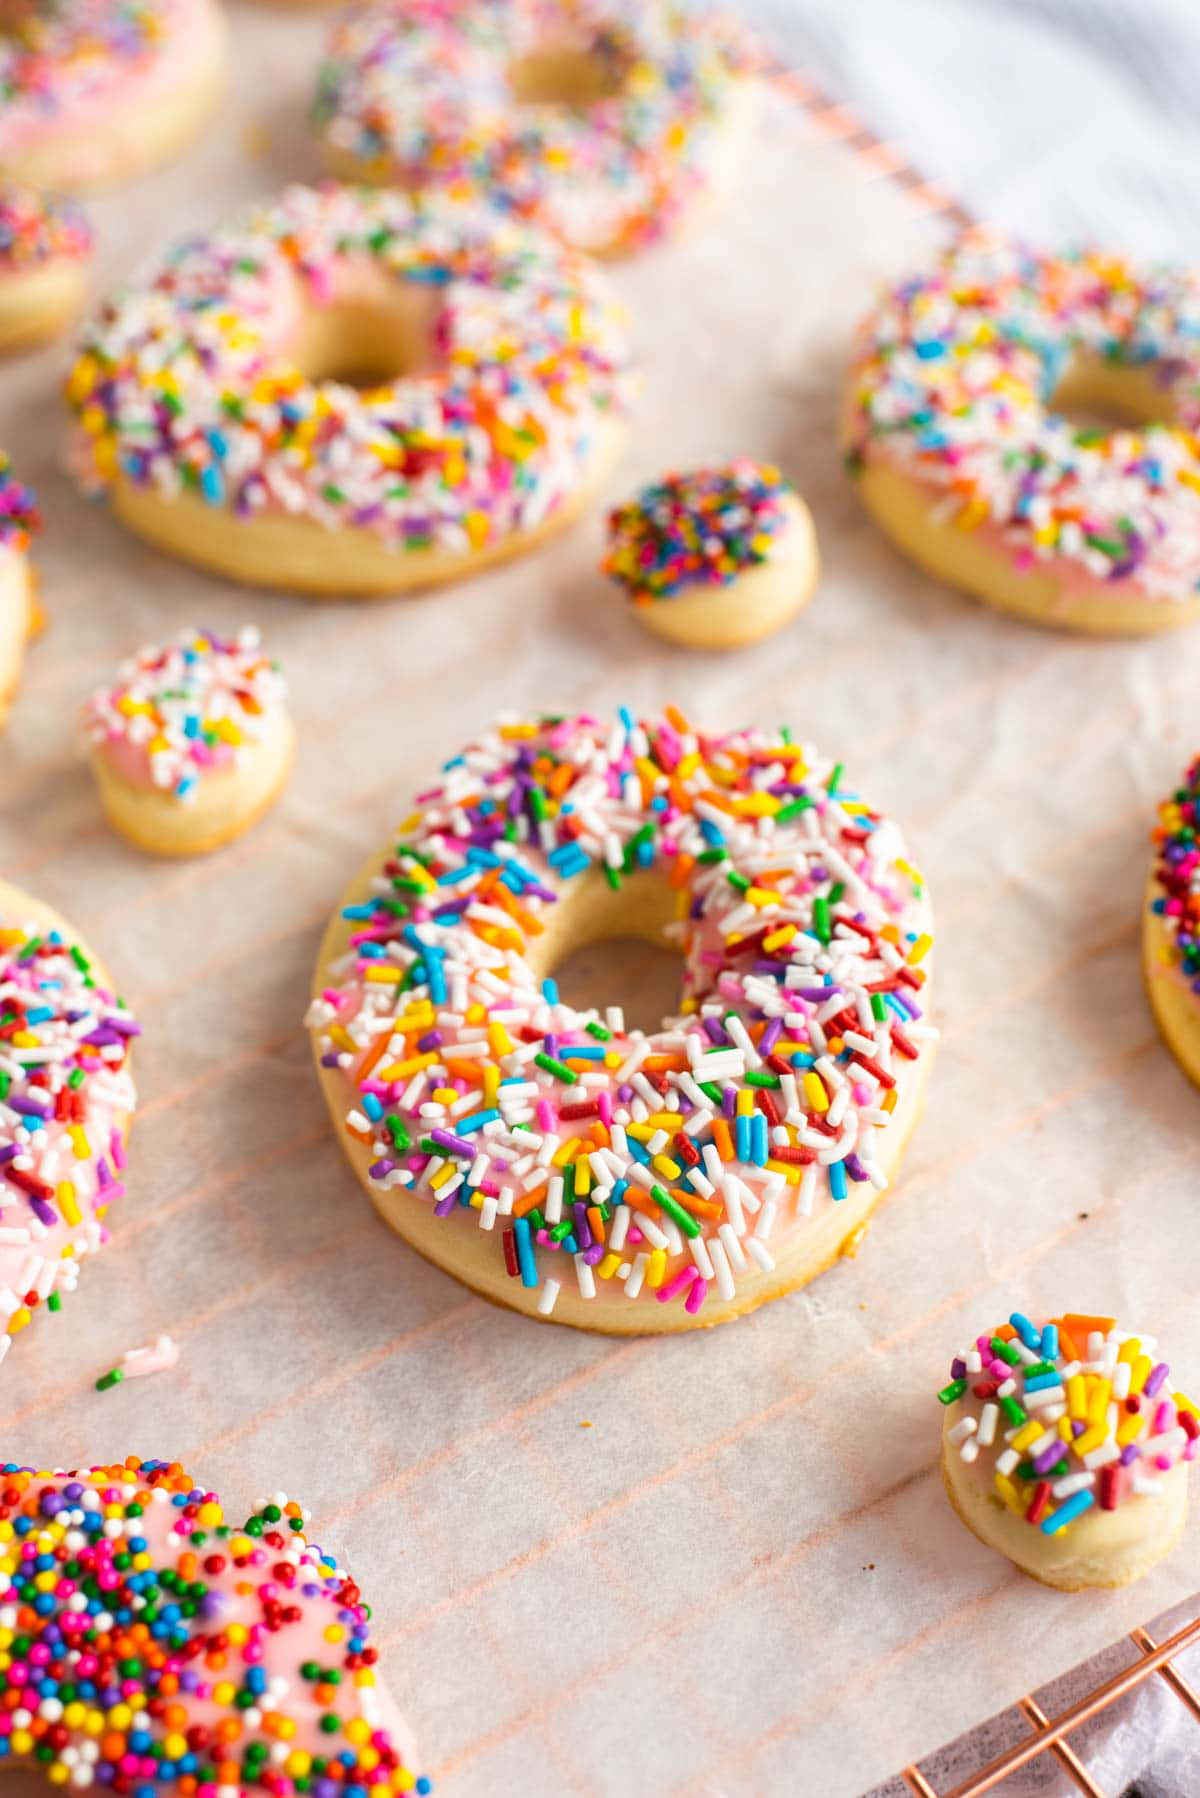 A Tray Of Donuts With Sprinkles On It